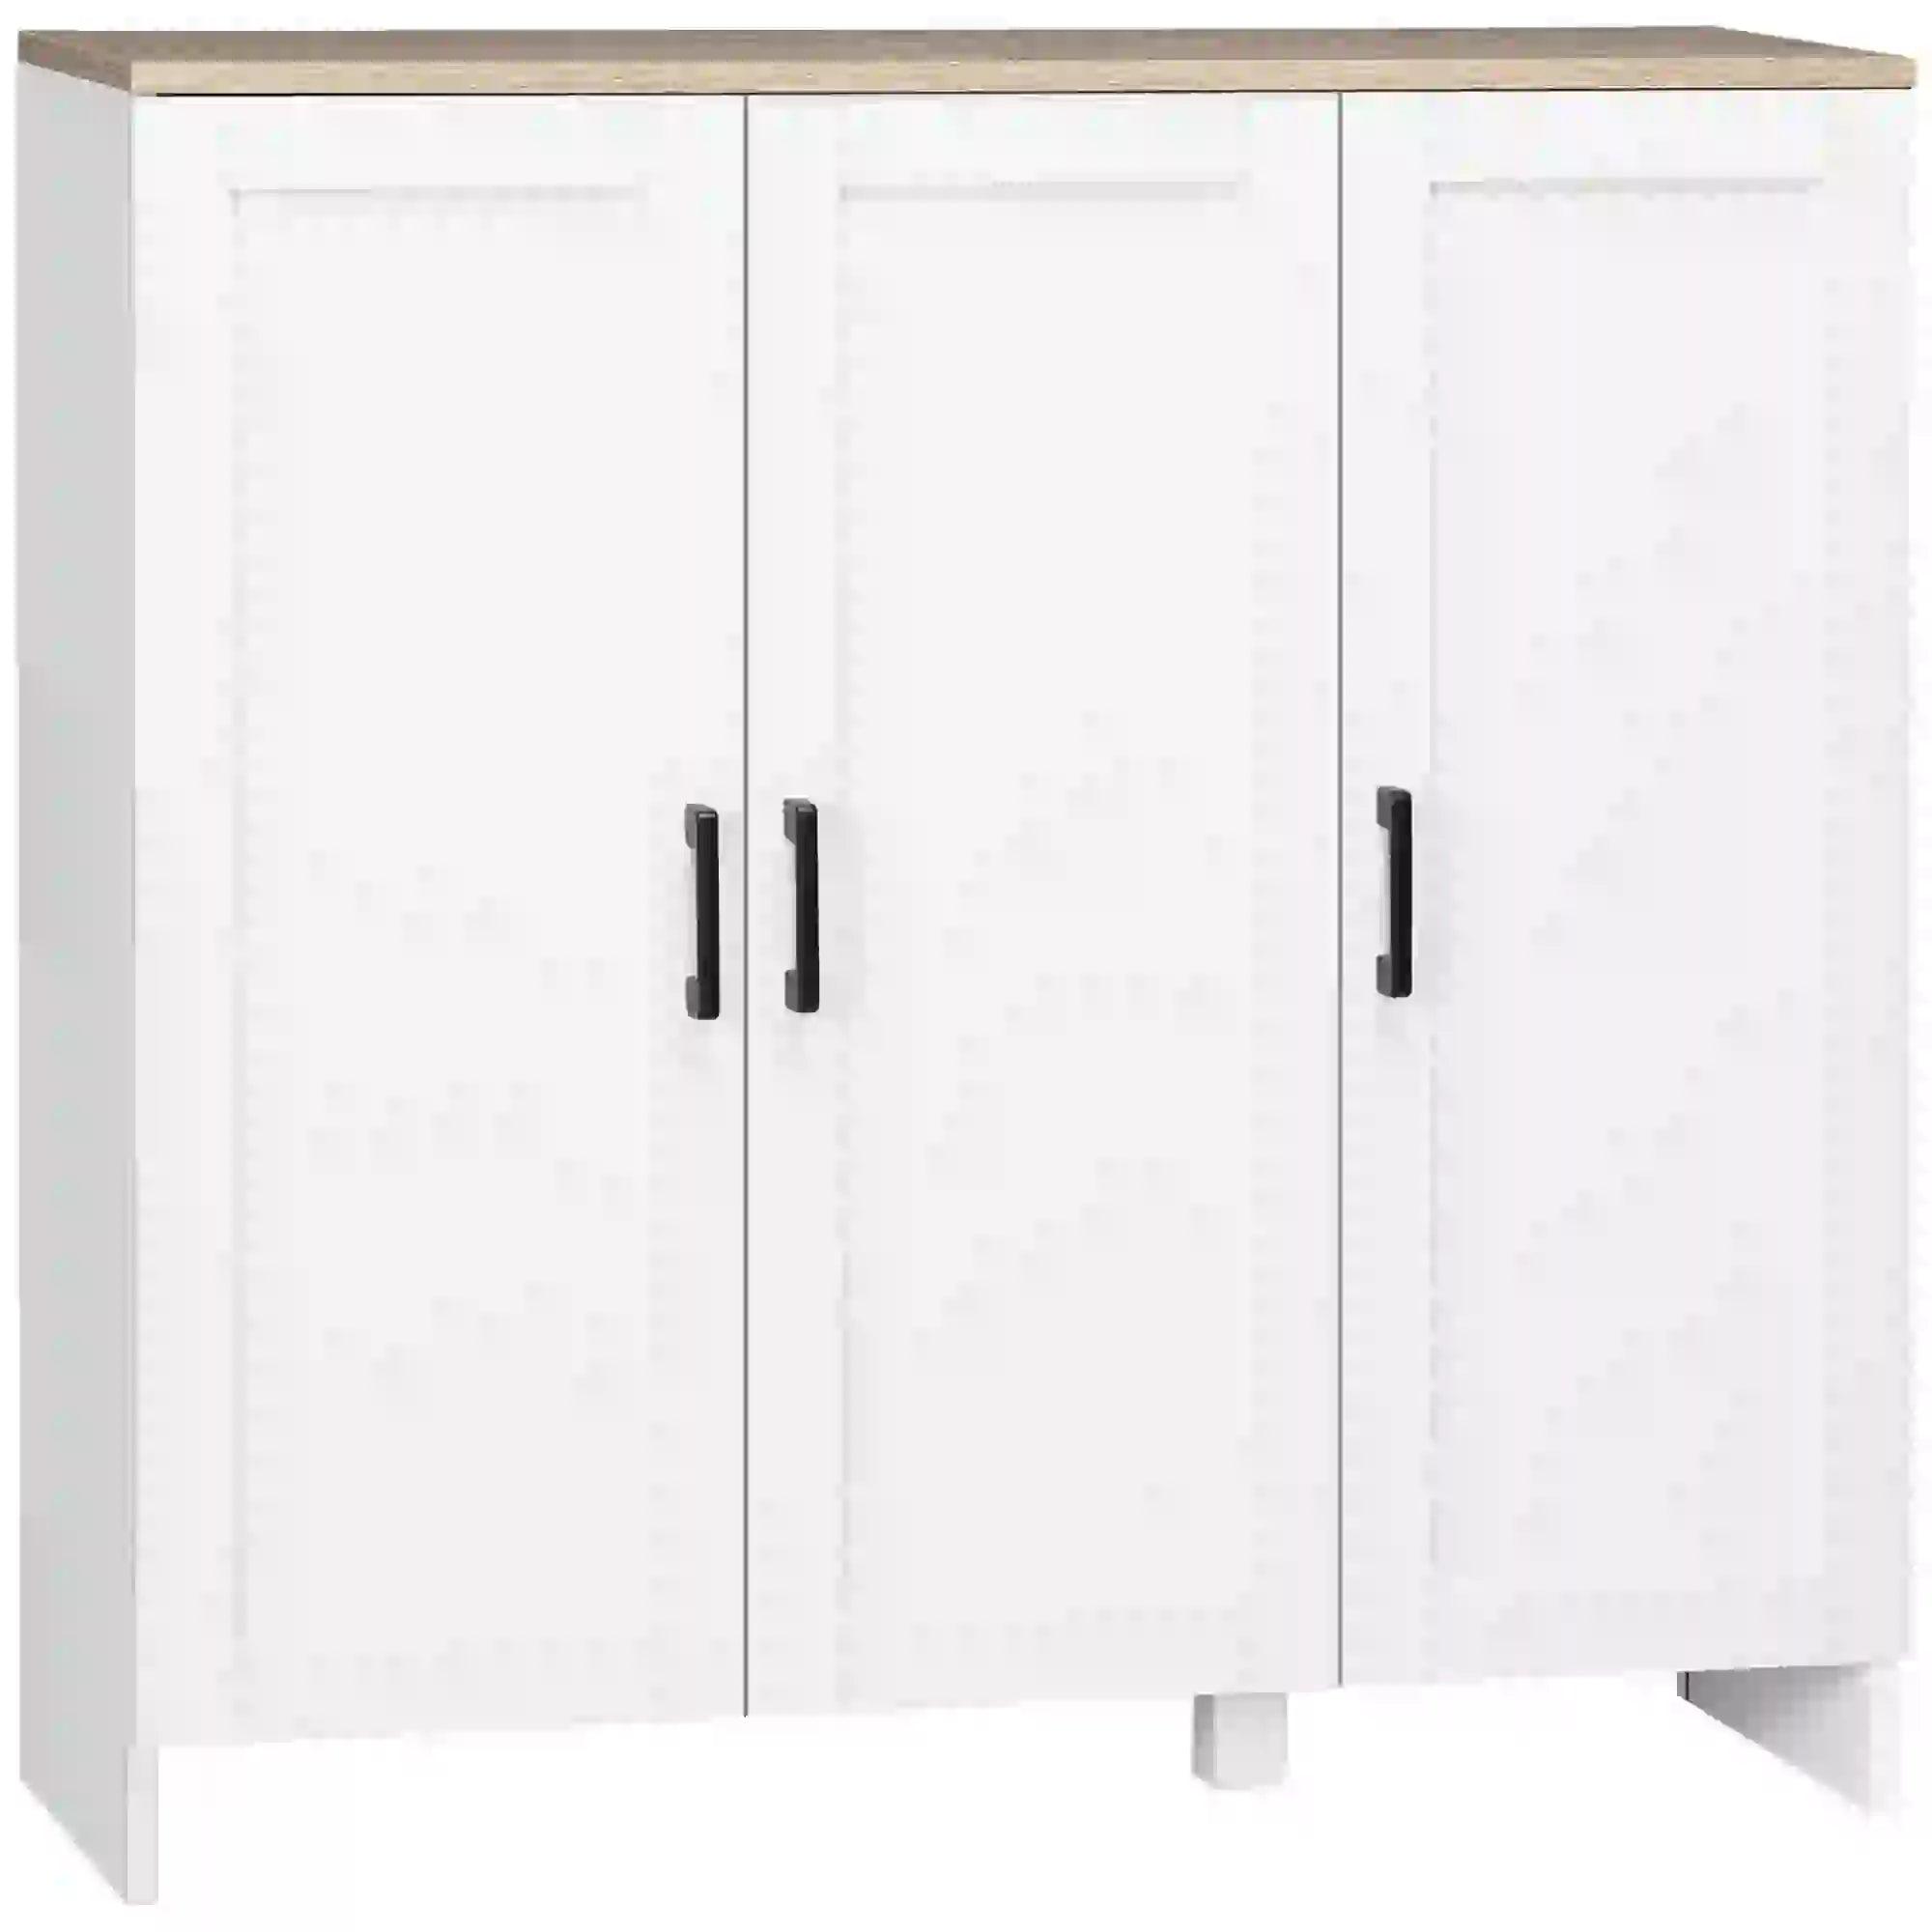 Modern Sideboard Buffet Cabinet, Modern Kitchen Storage Cabinet with 3 Doors Adjustable Shelves, for Dining Room, White